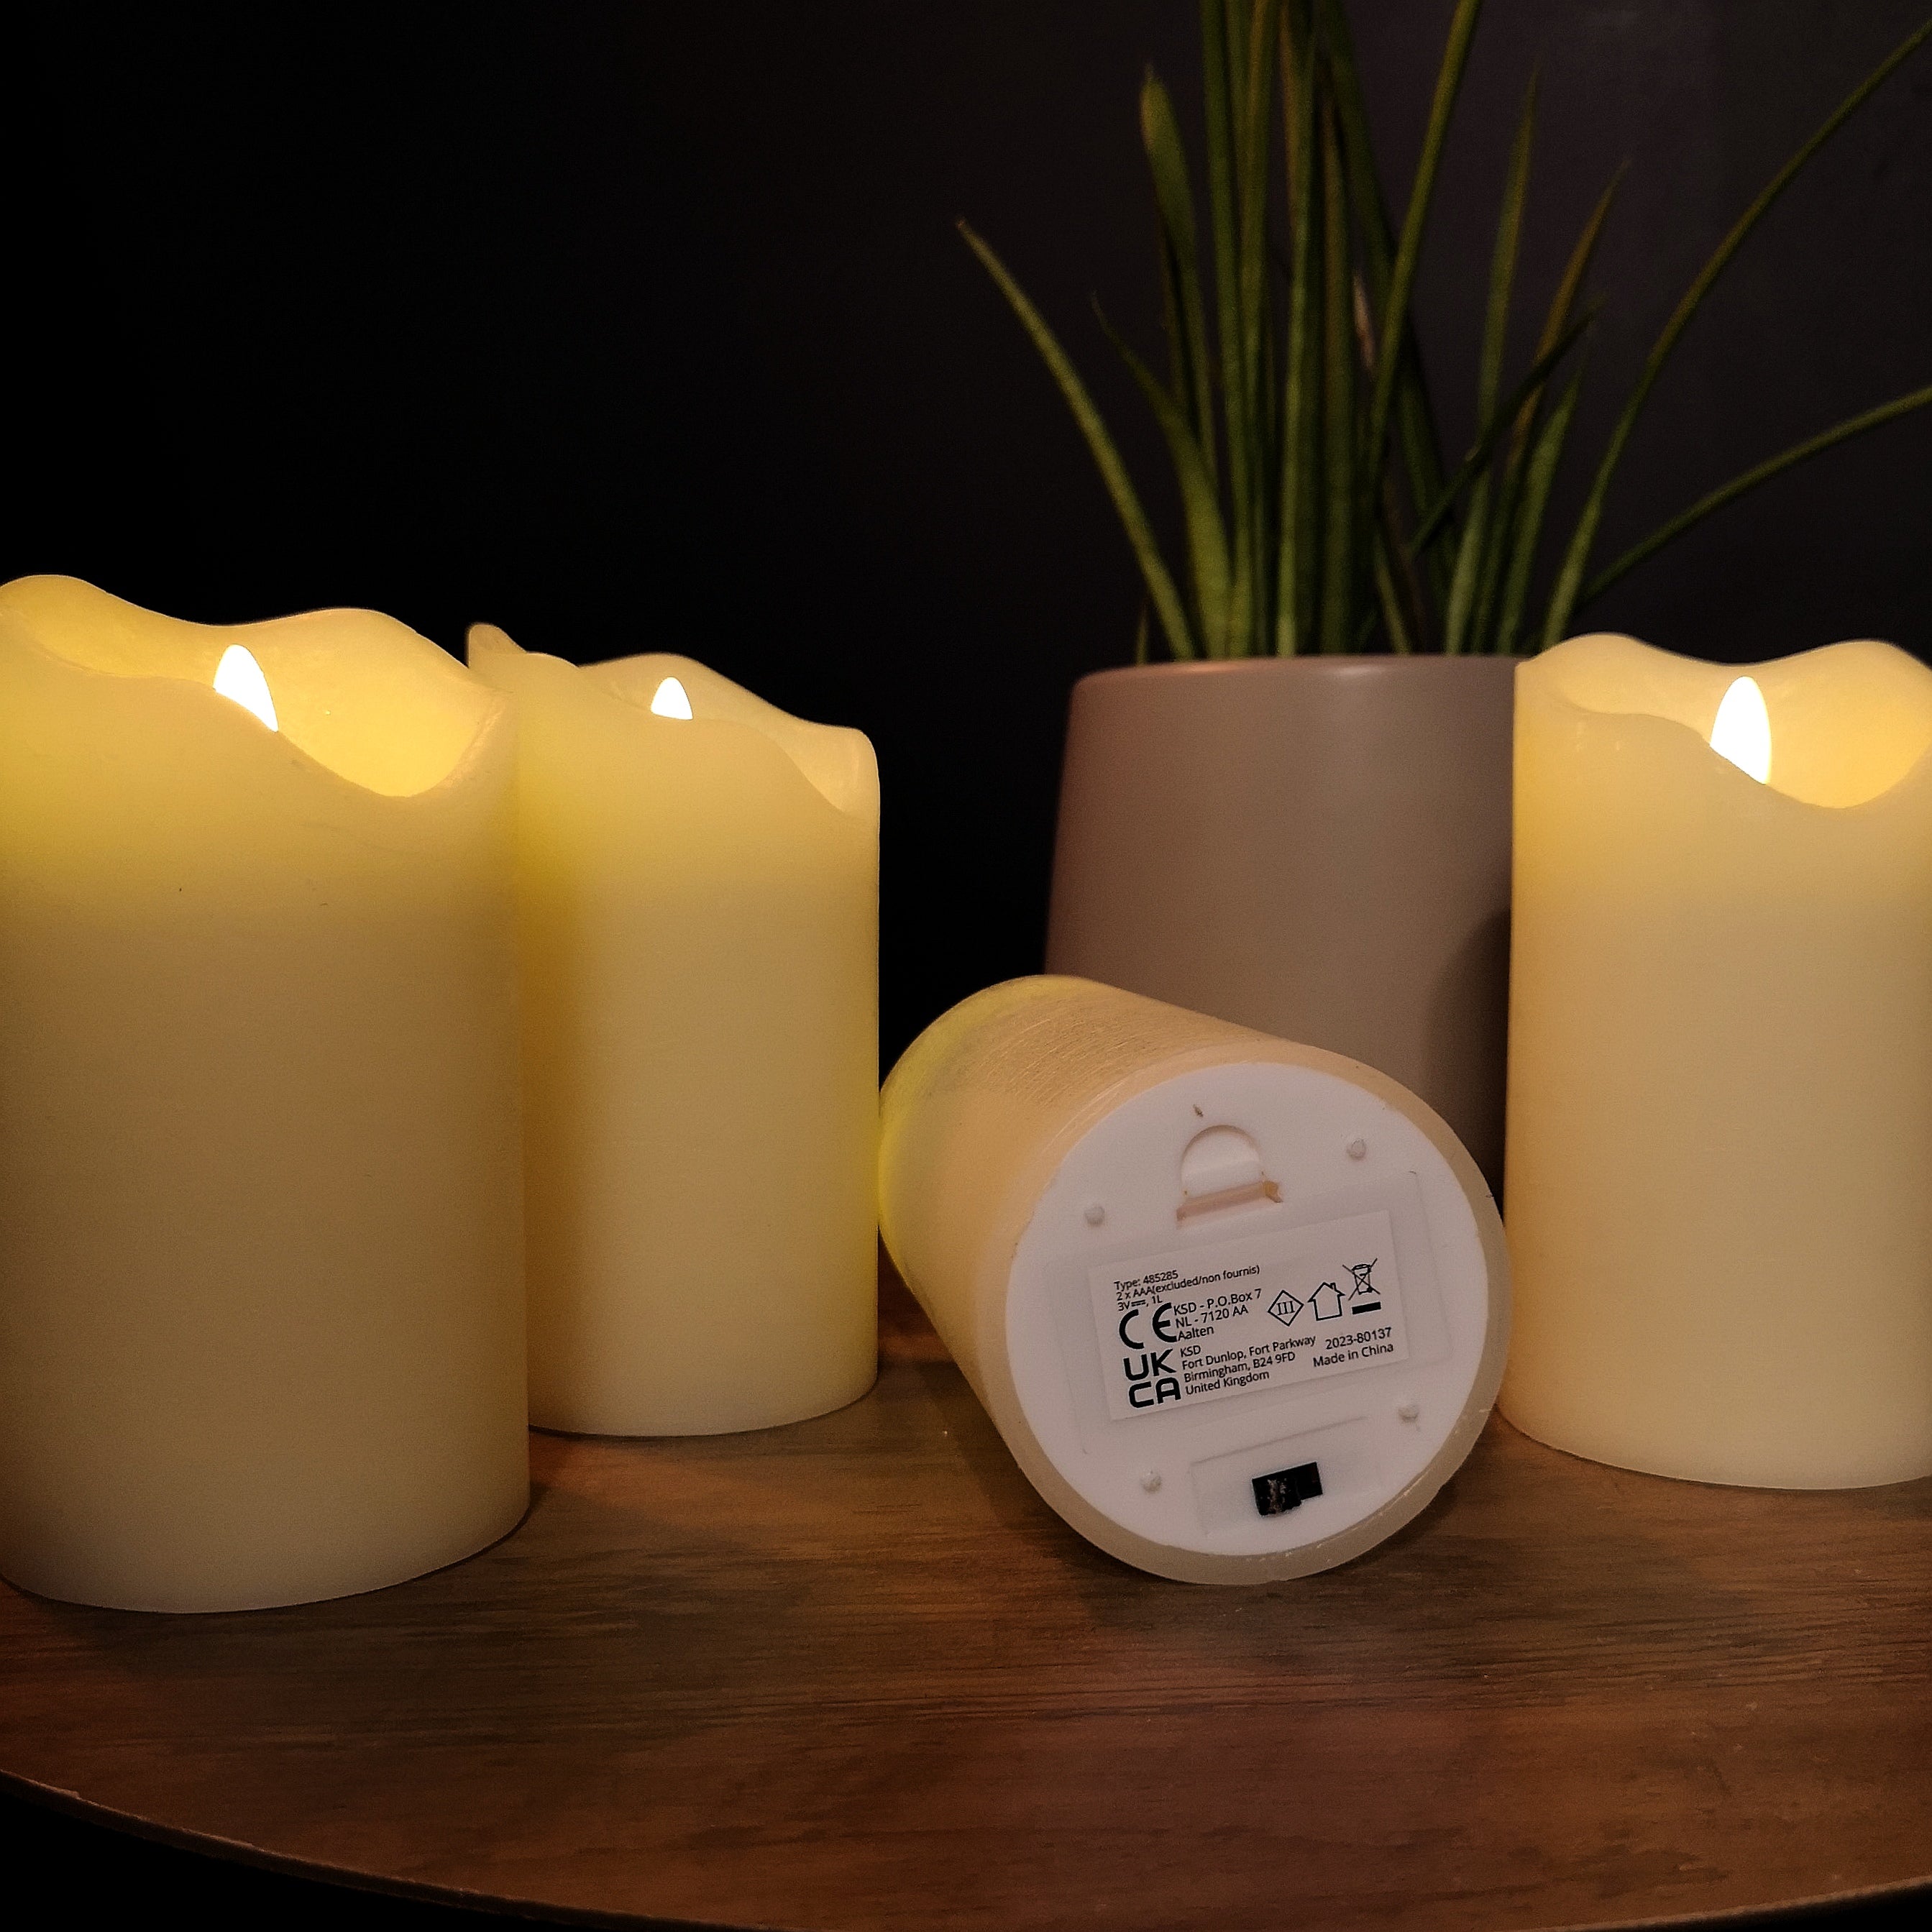 13cm Battery Operated Set of 4 Cream Wave Top Flameless LED Candle